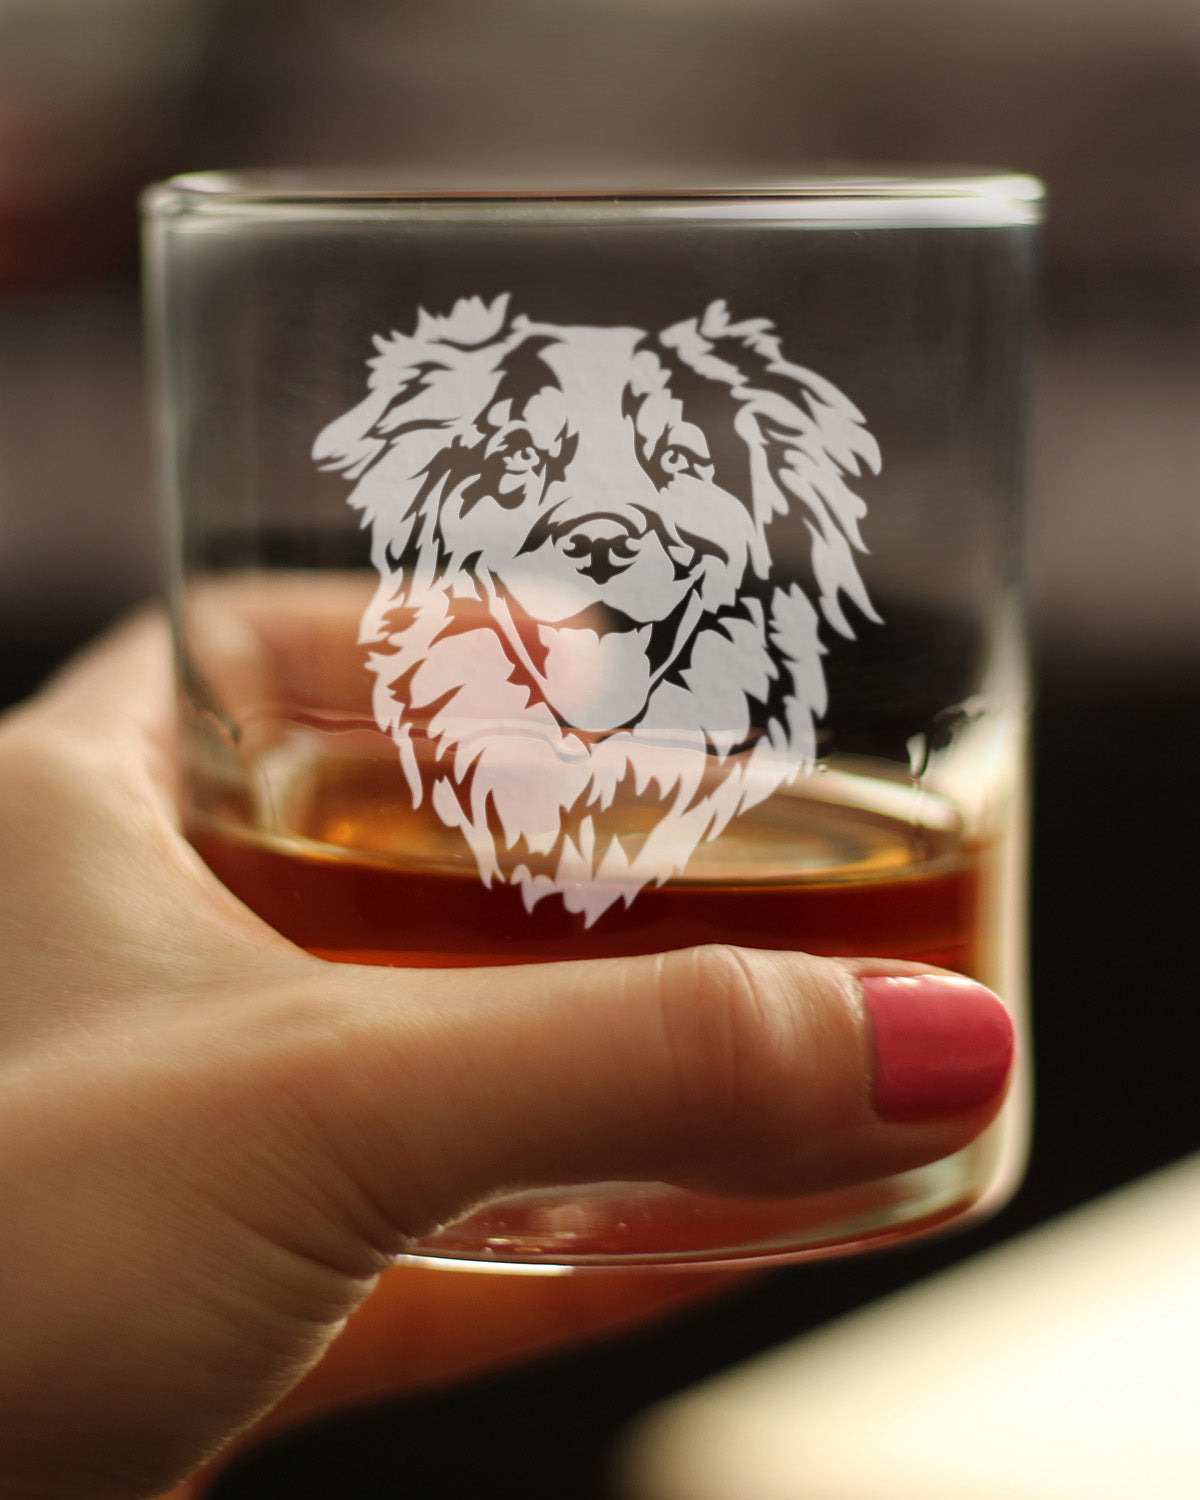 Australian Shepherd Face Whiskey Rocks Glass - Unique Dog Themed Decor and Gifts for Moms &amp; Dads of Aussies - 10.25 Oz